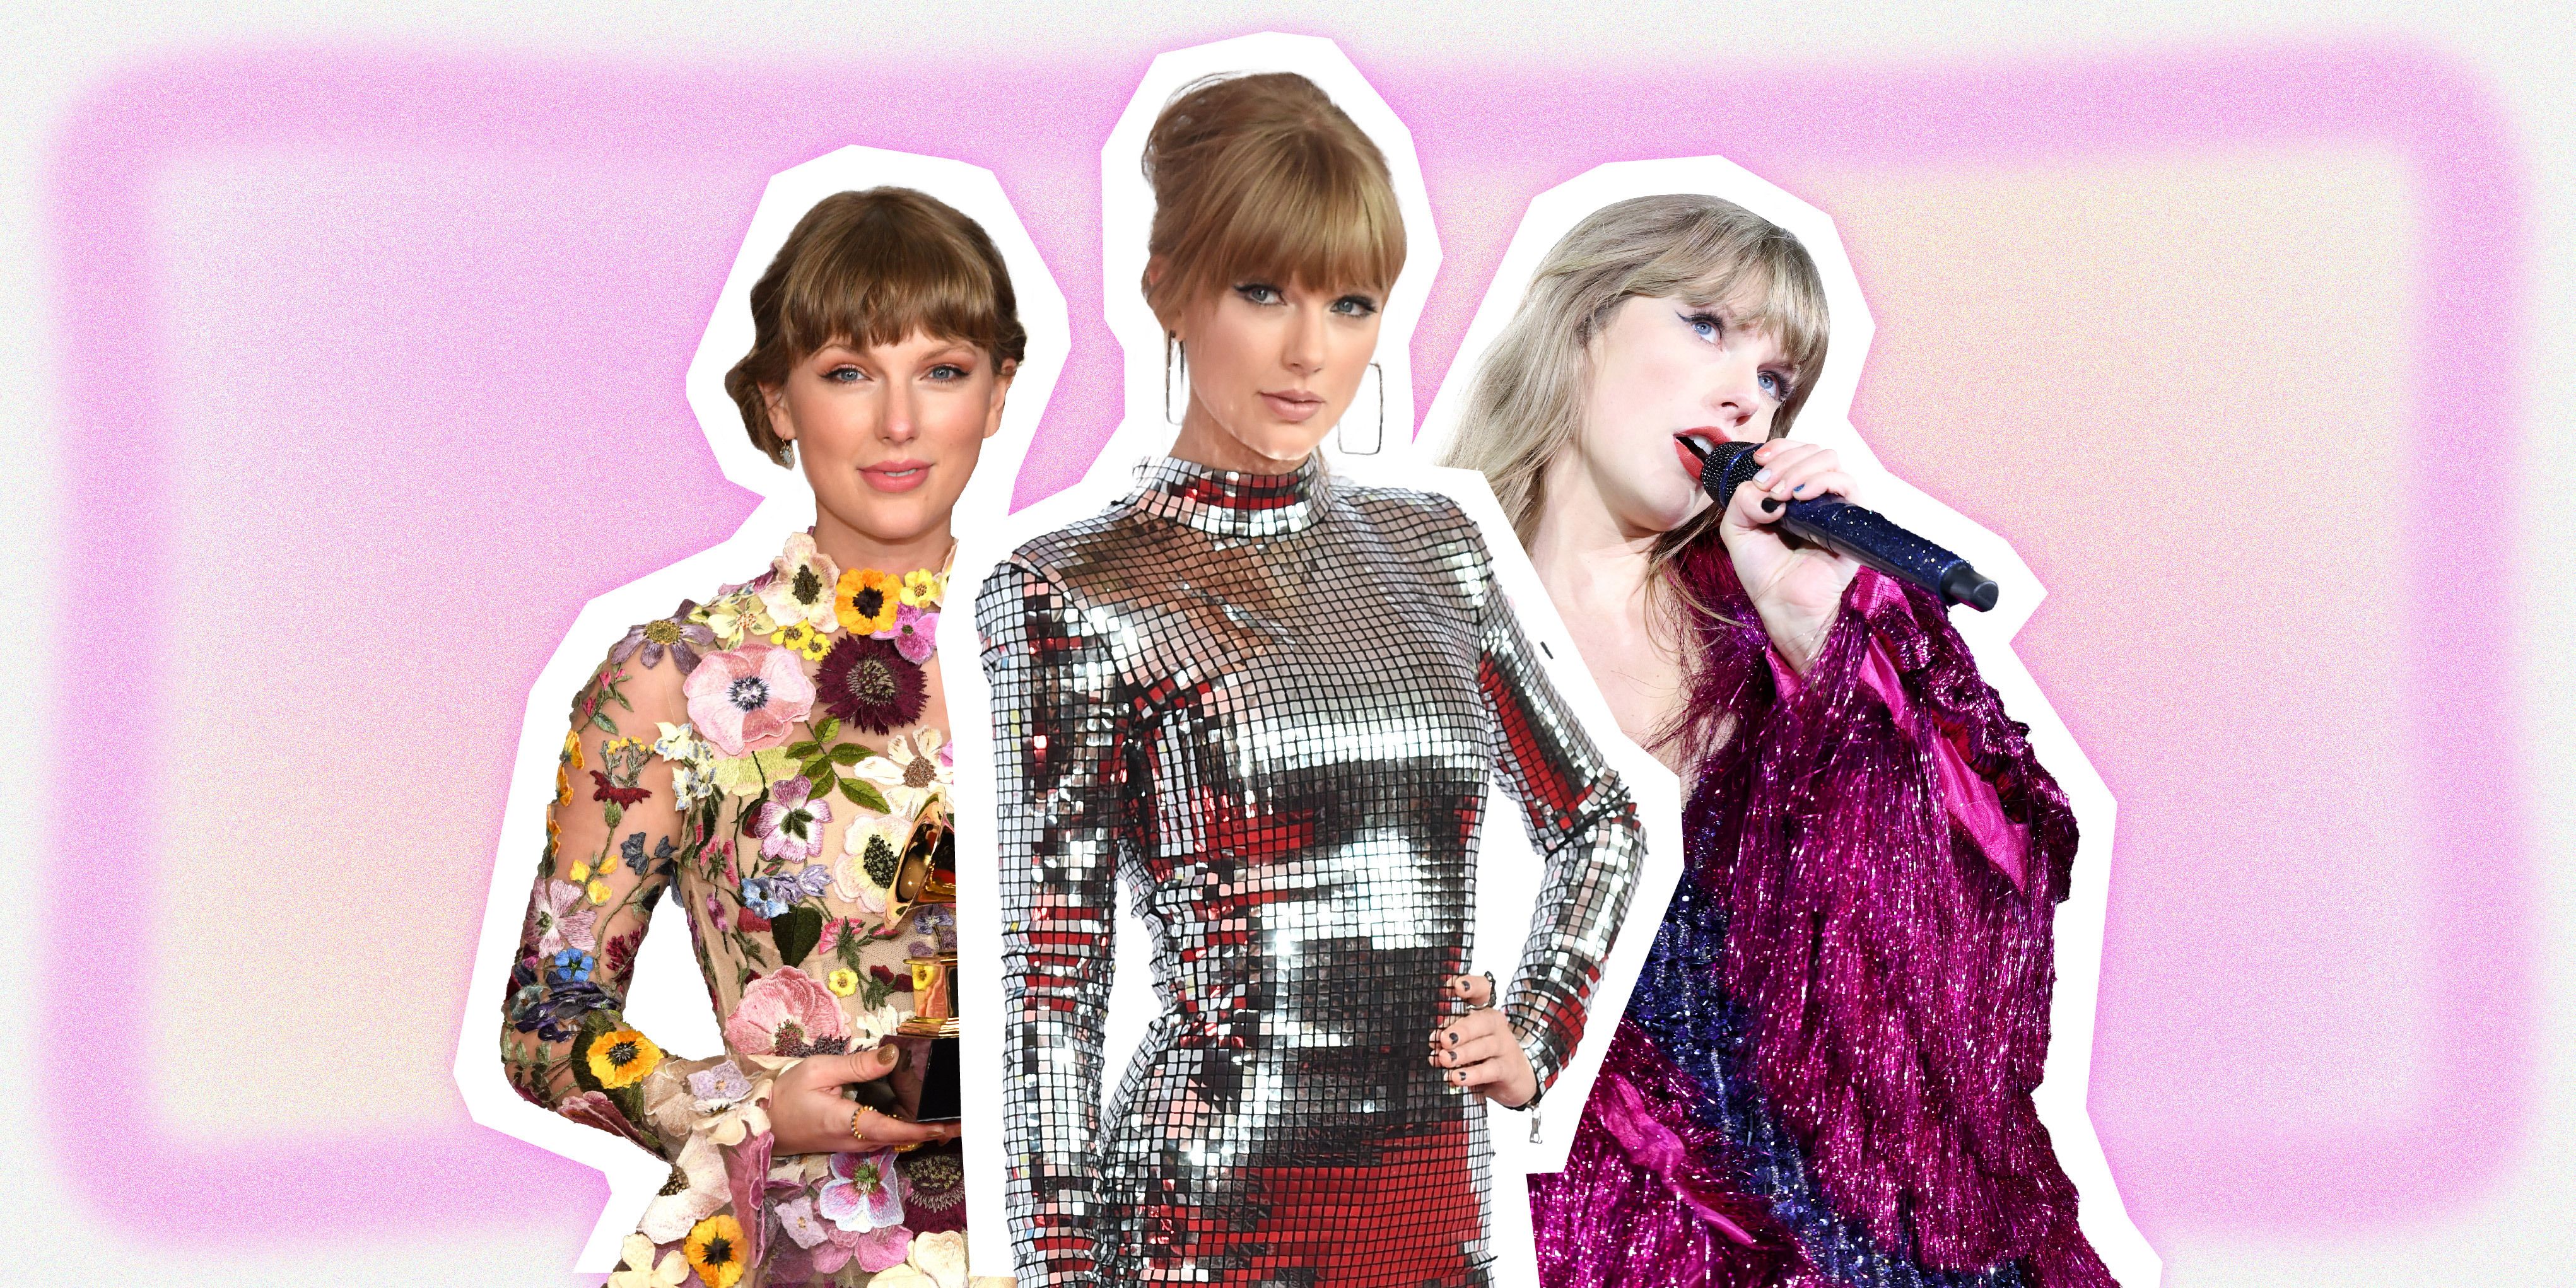 13 of The Best Taylor Swift Costume Ideas in 2023